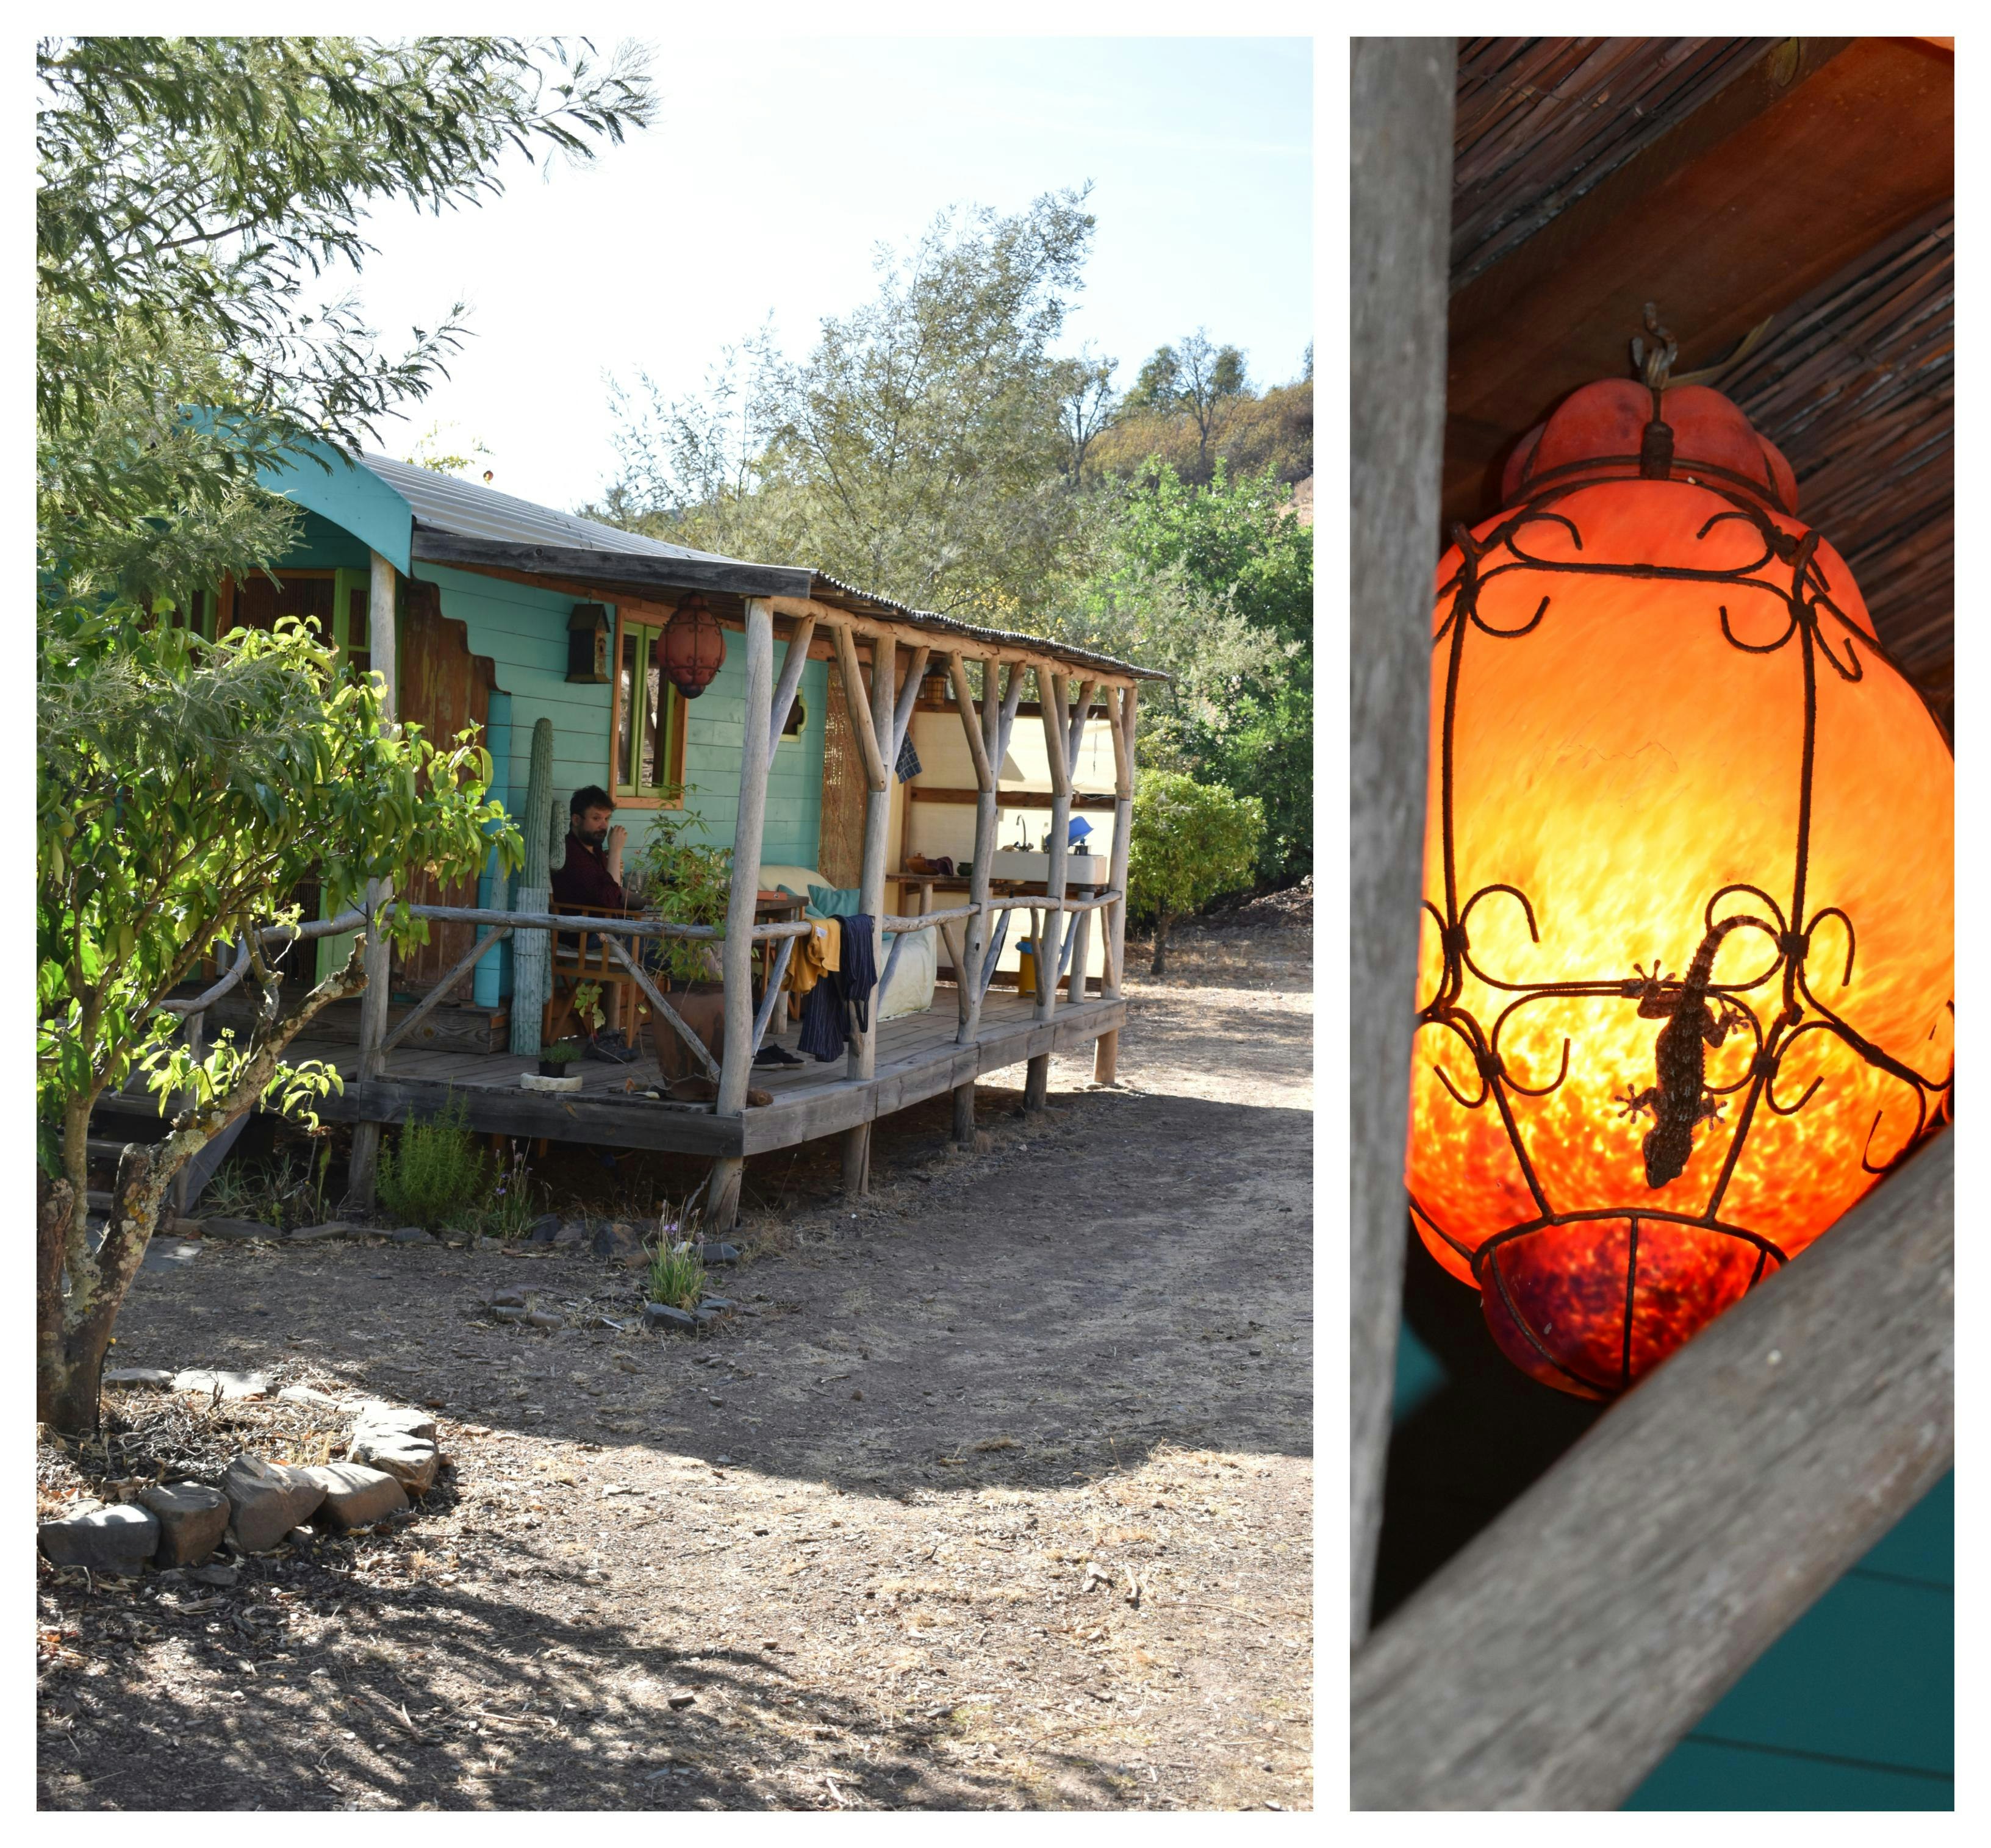 On the left a small blue house in the middle of dry ground and green trees. A man sits on the porch. On the right a close up of a gecko on a brightly lit orange lampshade